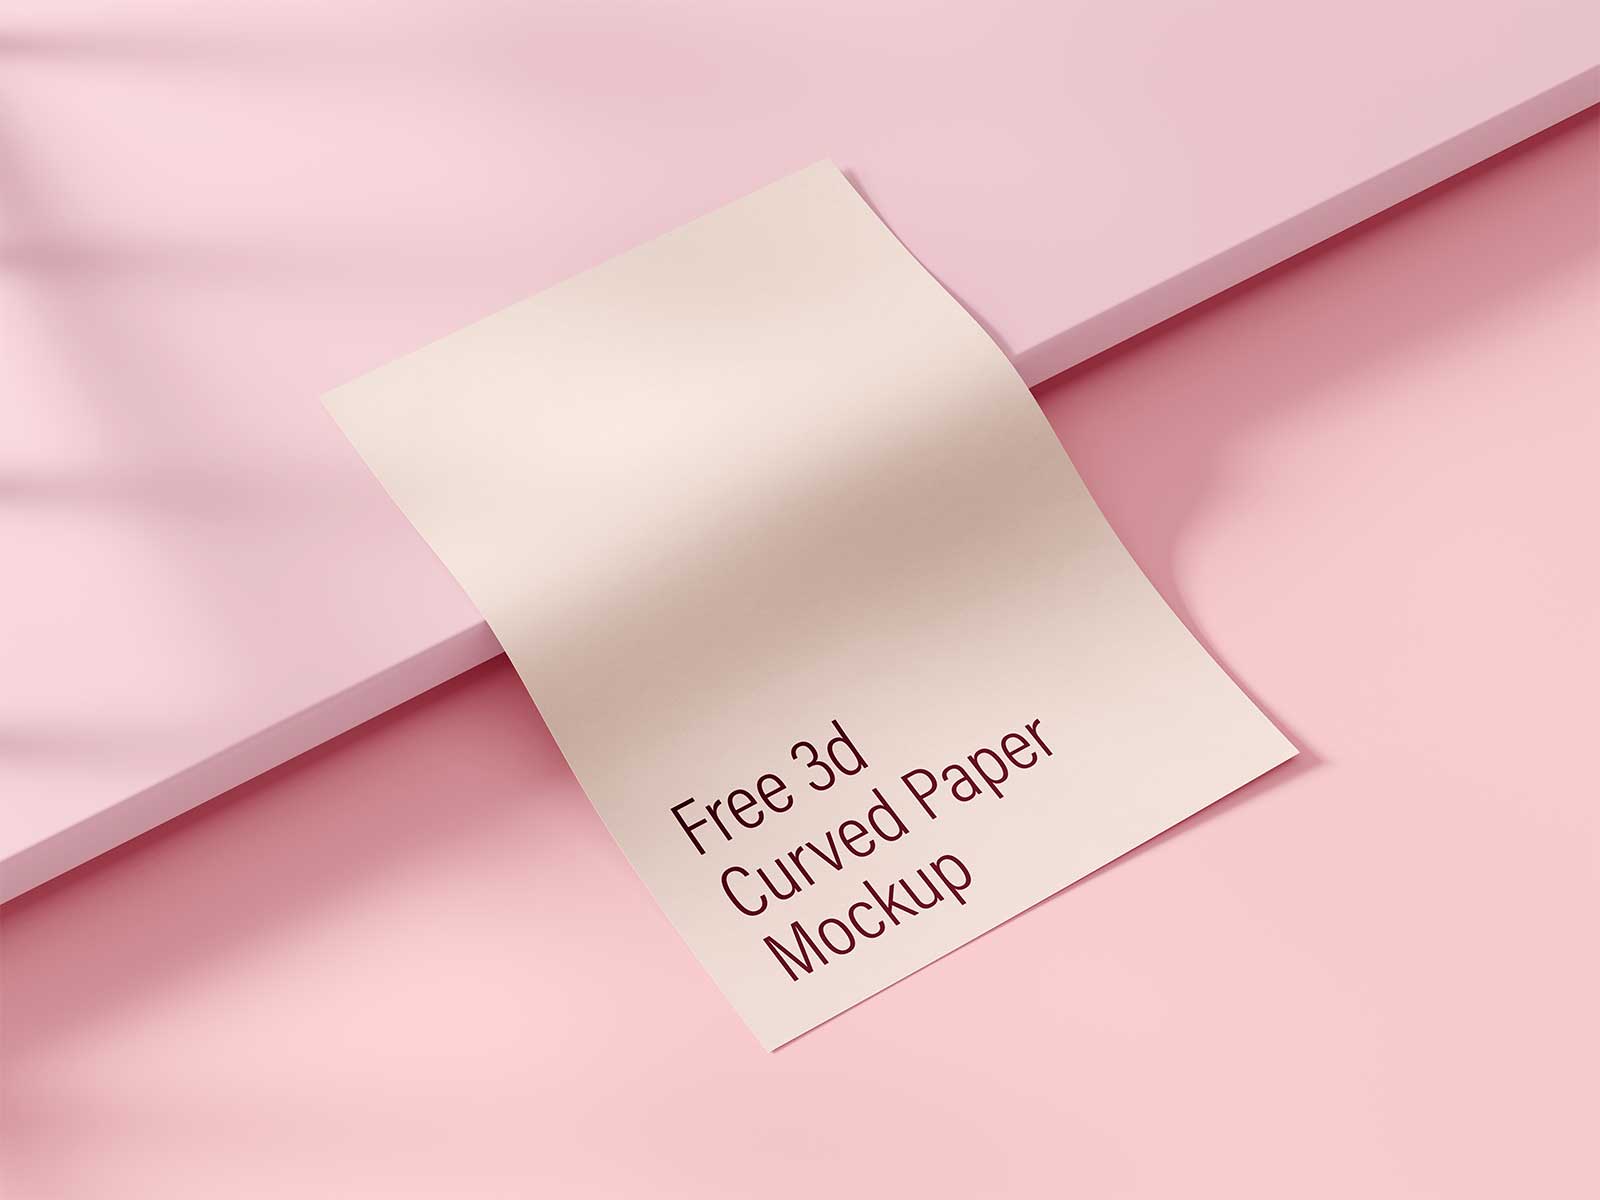 Free Curved Paper Mockup: Add Dimension to Your Designs